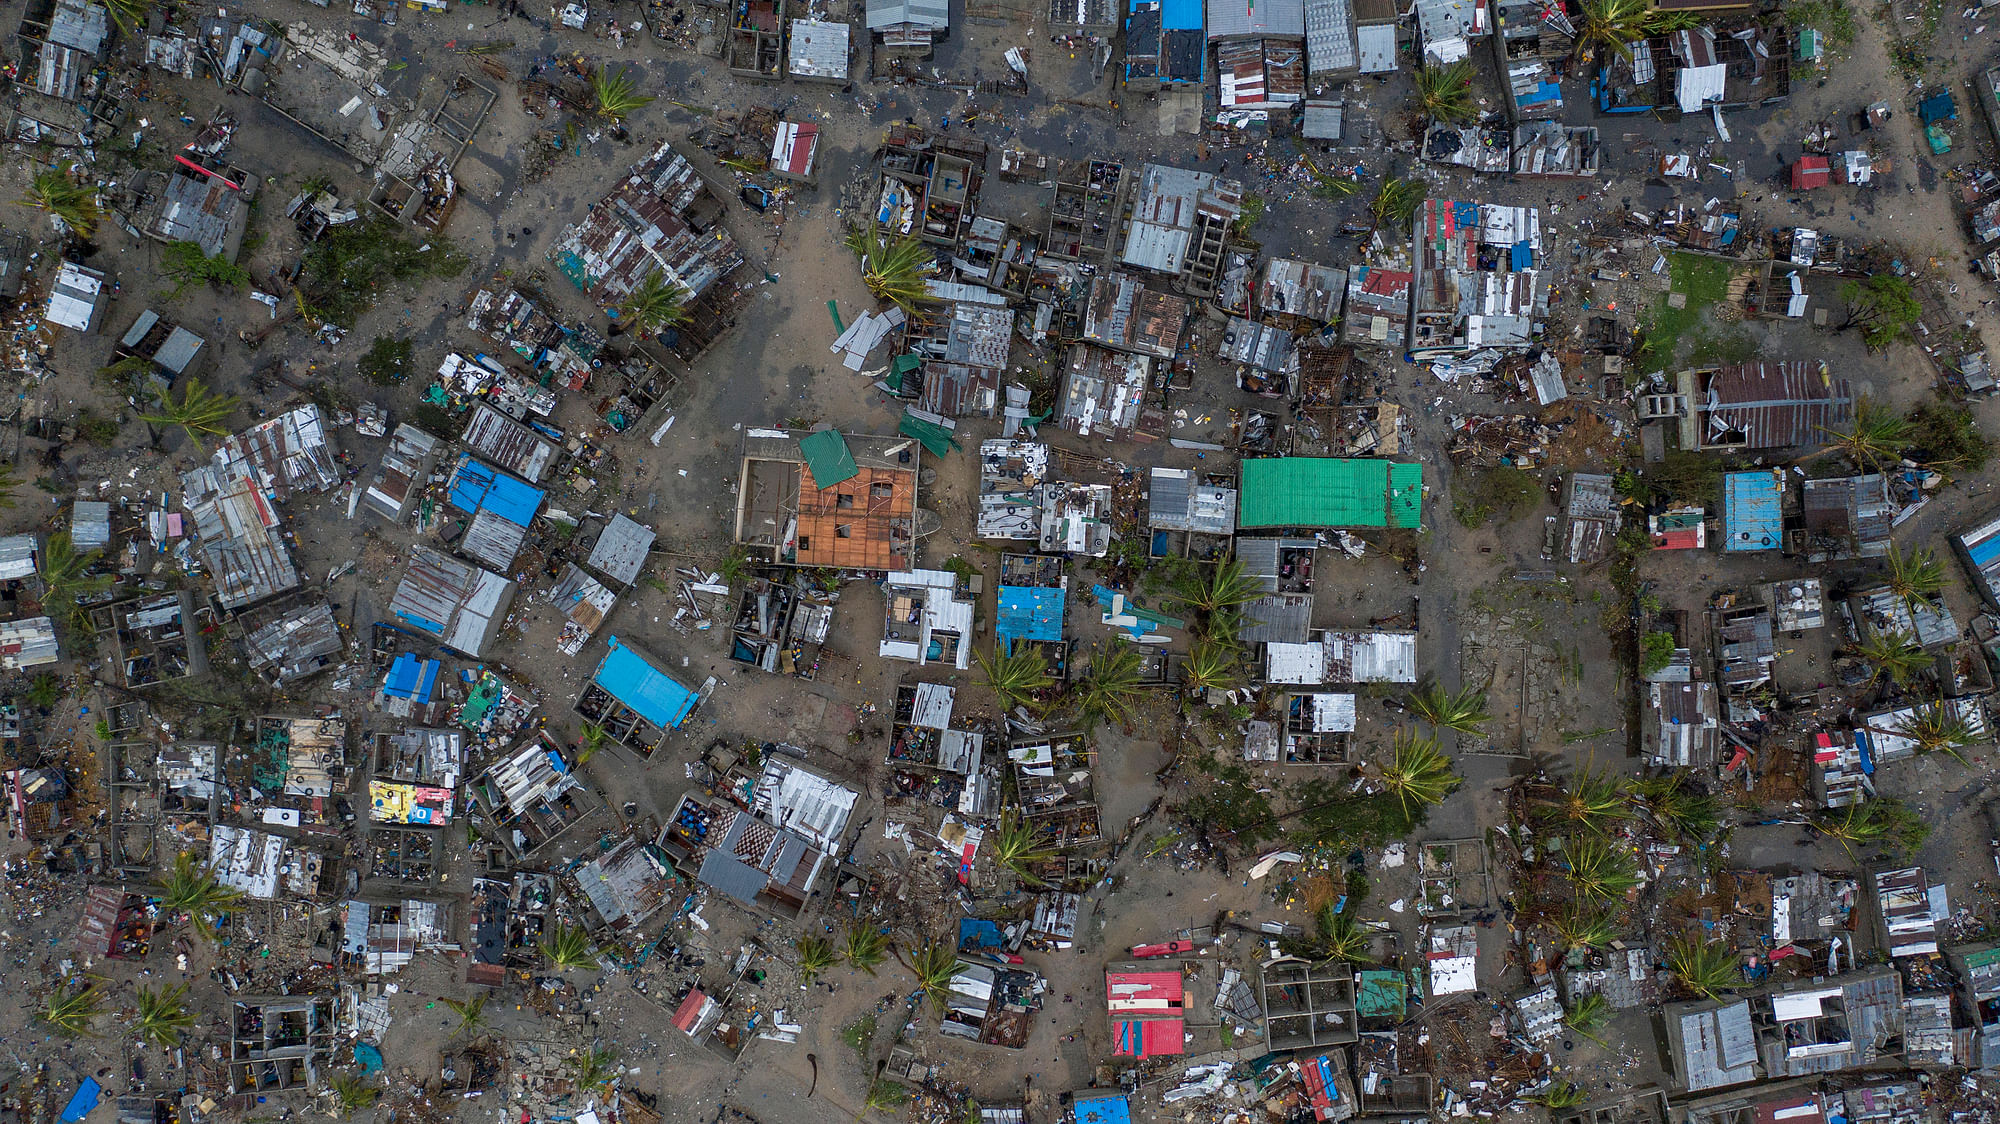 Seen from a drone Praia Nova Village, one of the most affected neighbourhoods in Beira, razed by the passing cyclone, in the coastal city of Beira, Mozambique, Sunday 17 March, 2019. Families are returning to the vulnerable shanty town following cyclone high winds and rain. More than 1,000 people are feared dead in Mozambique four days after a cyclone slammed into the southern African country.